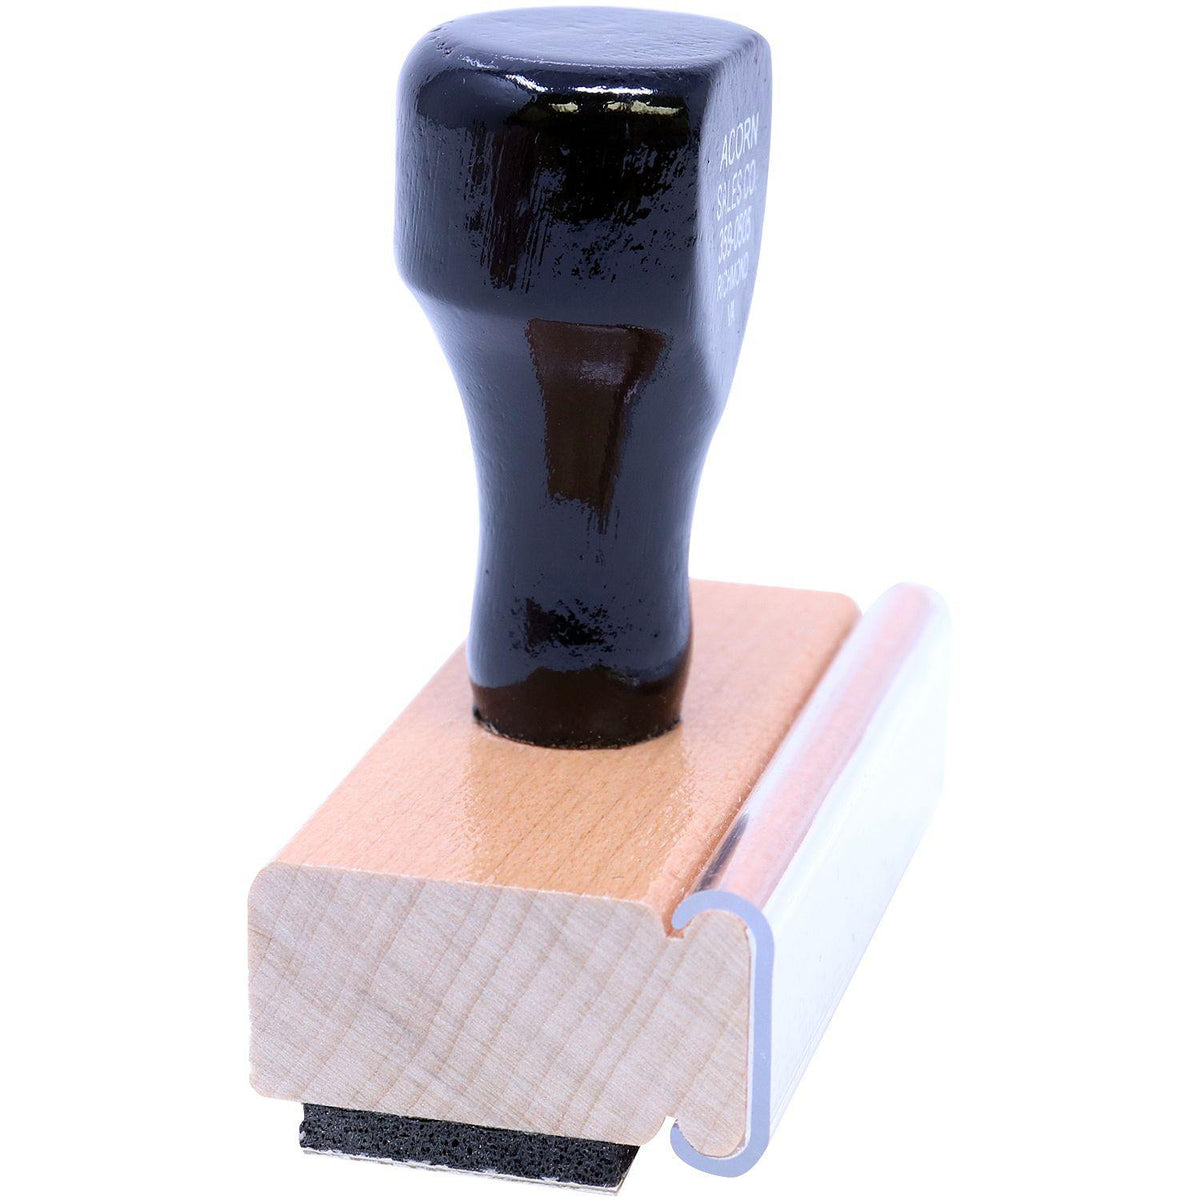 Side View of What Happened Rubber Stamp at an Angle